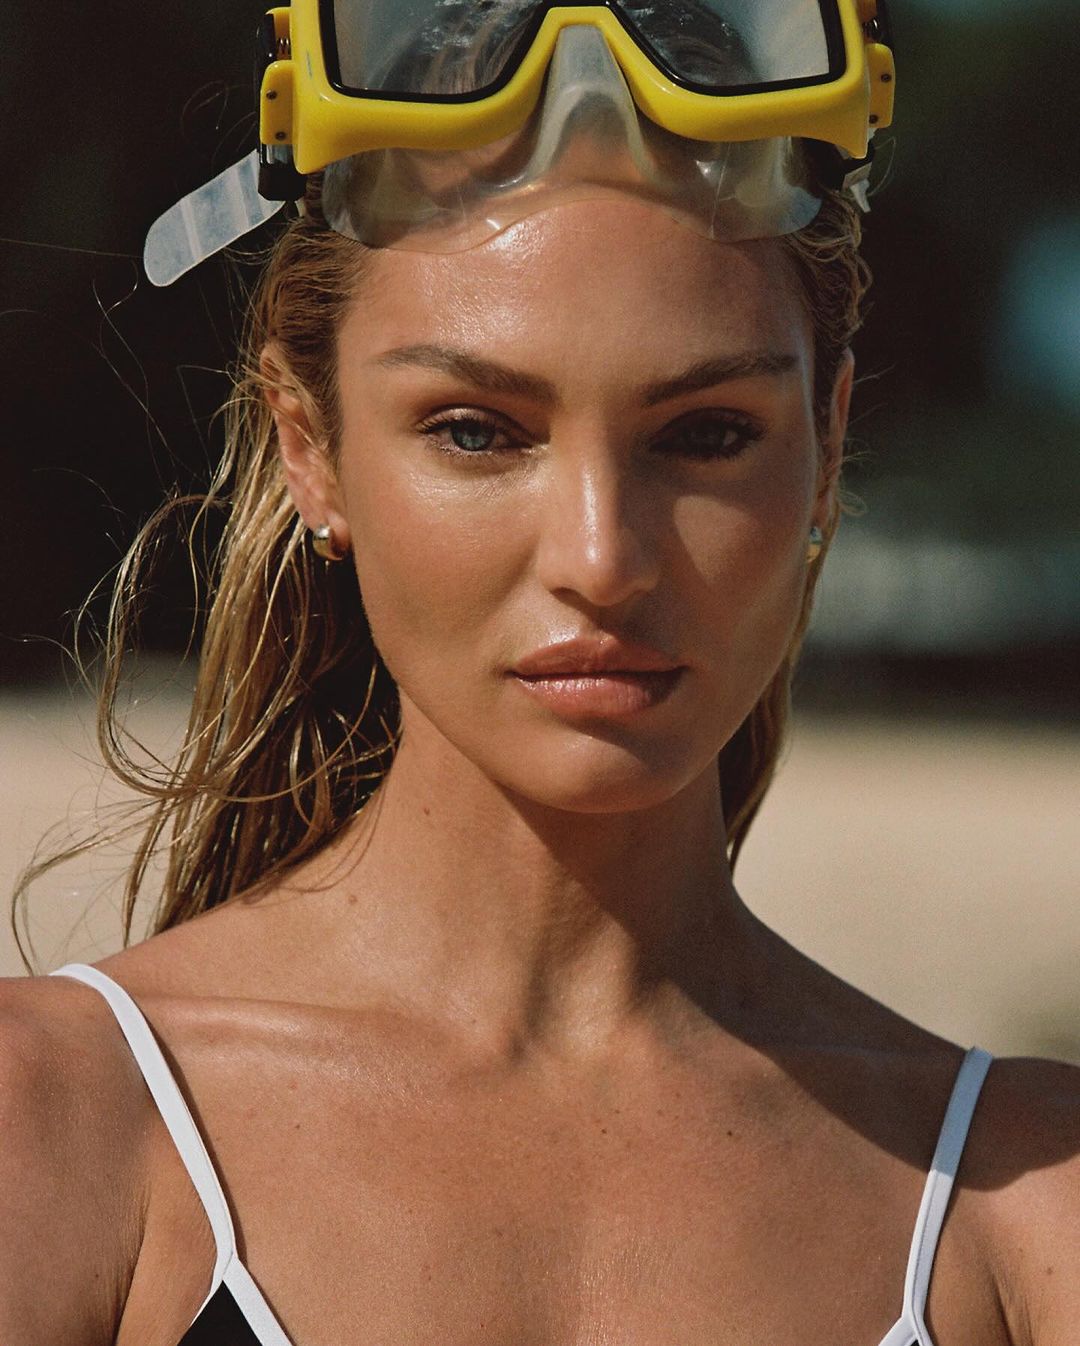 Candice Swanepoel and Hailey Bieber Link Up on the Beach! - Photo 3